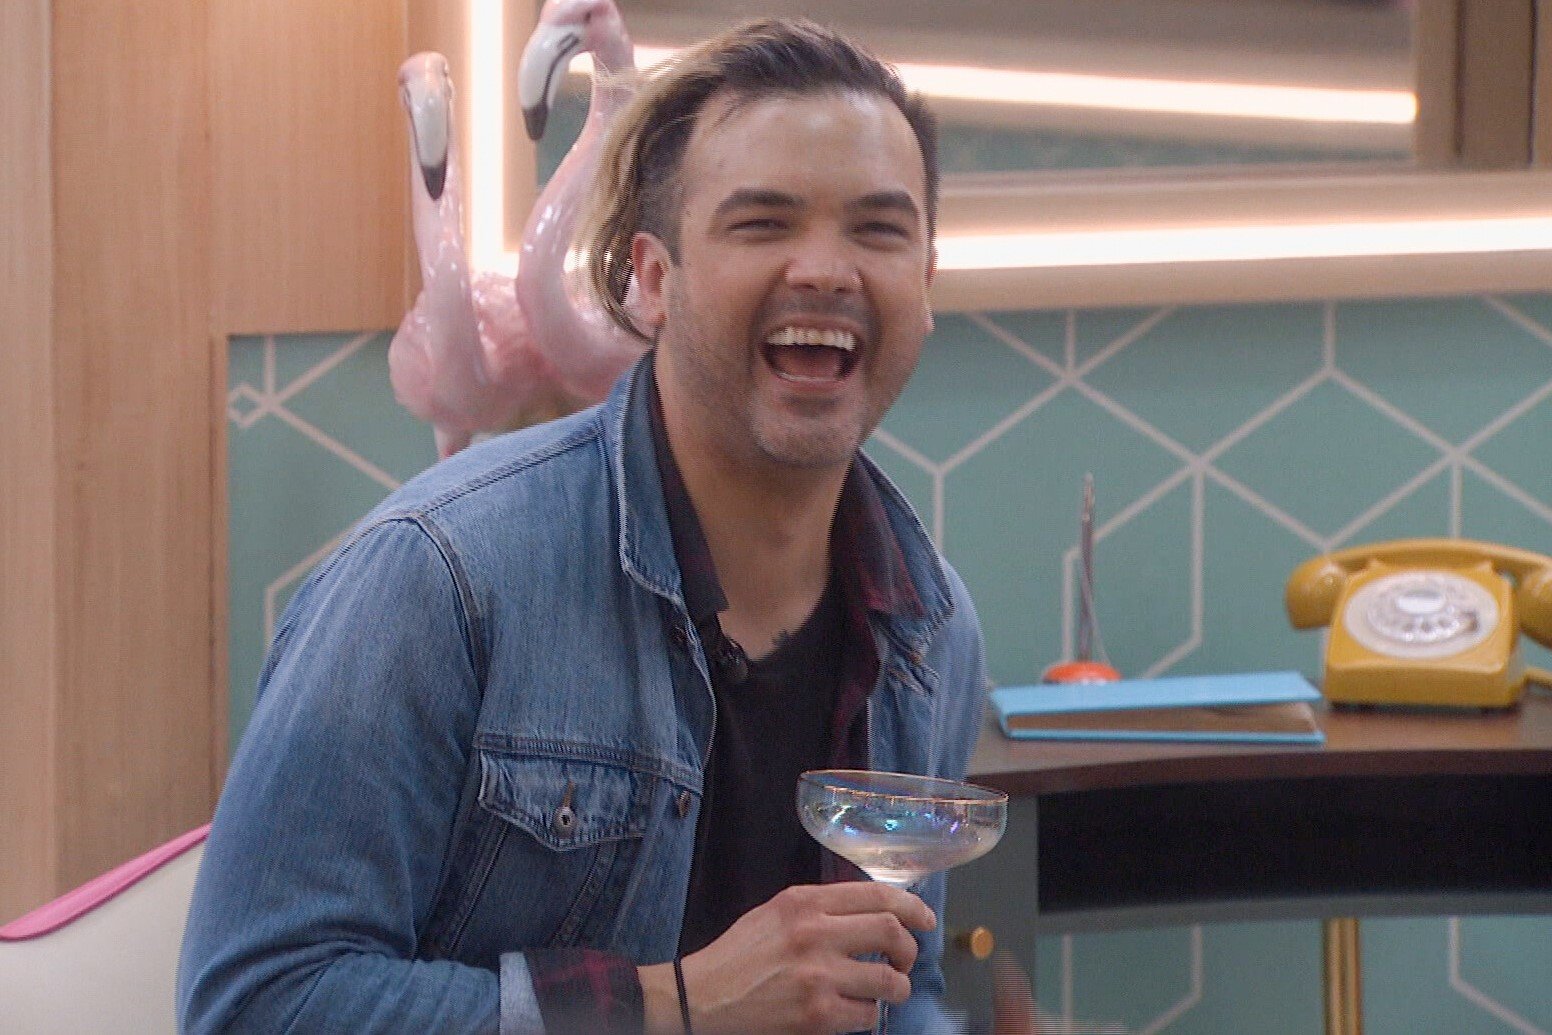 Daniel Durston, who is one of the 'Big Brother 24' houseguests, wears a jean jacket over a black shirt and holds a cocktail glass.